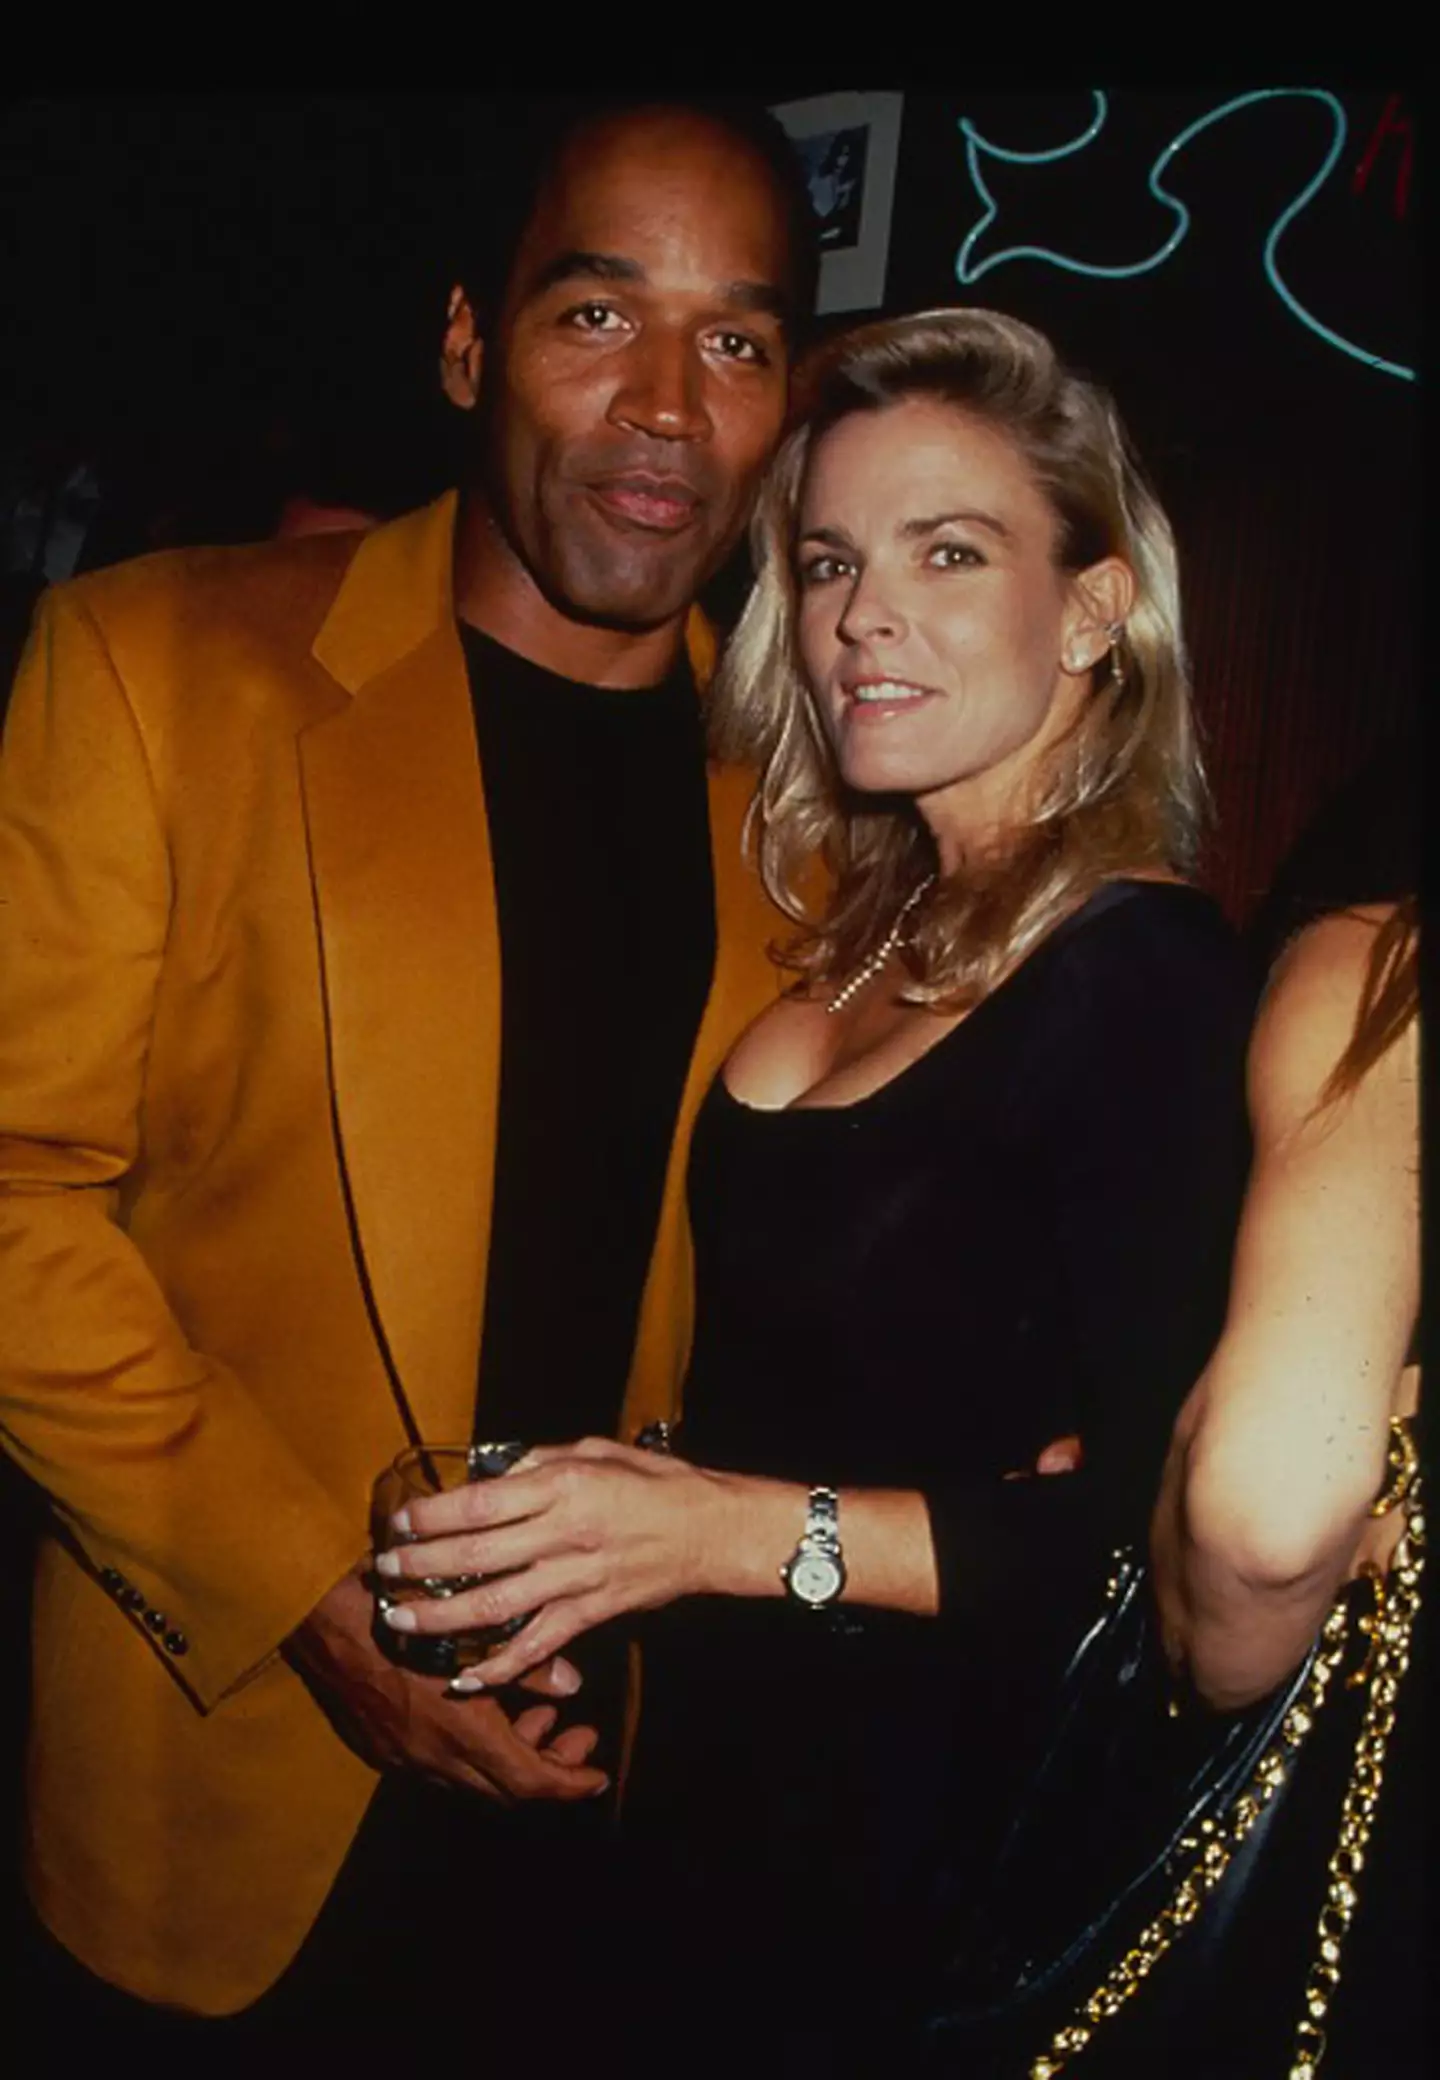 OJ was found not guilty for his ex wife's murder.